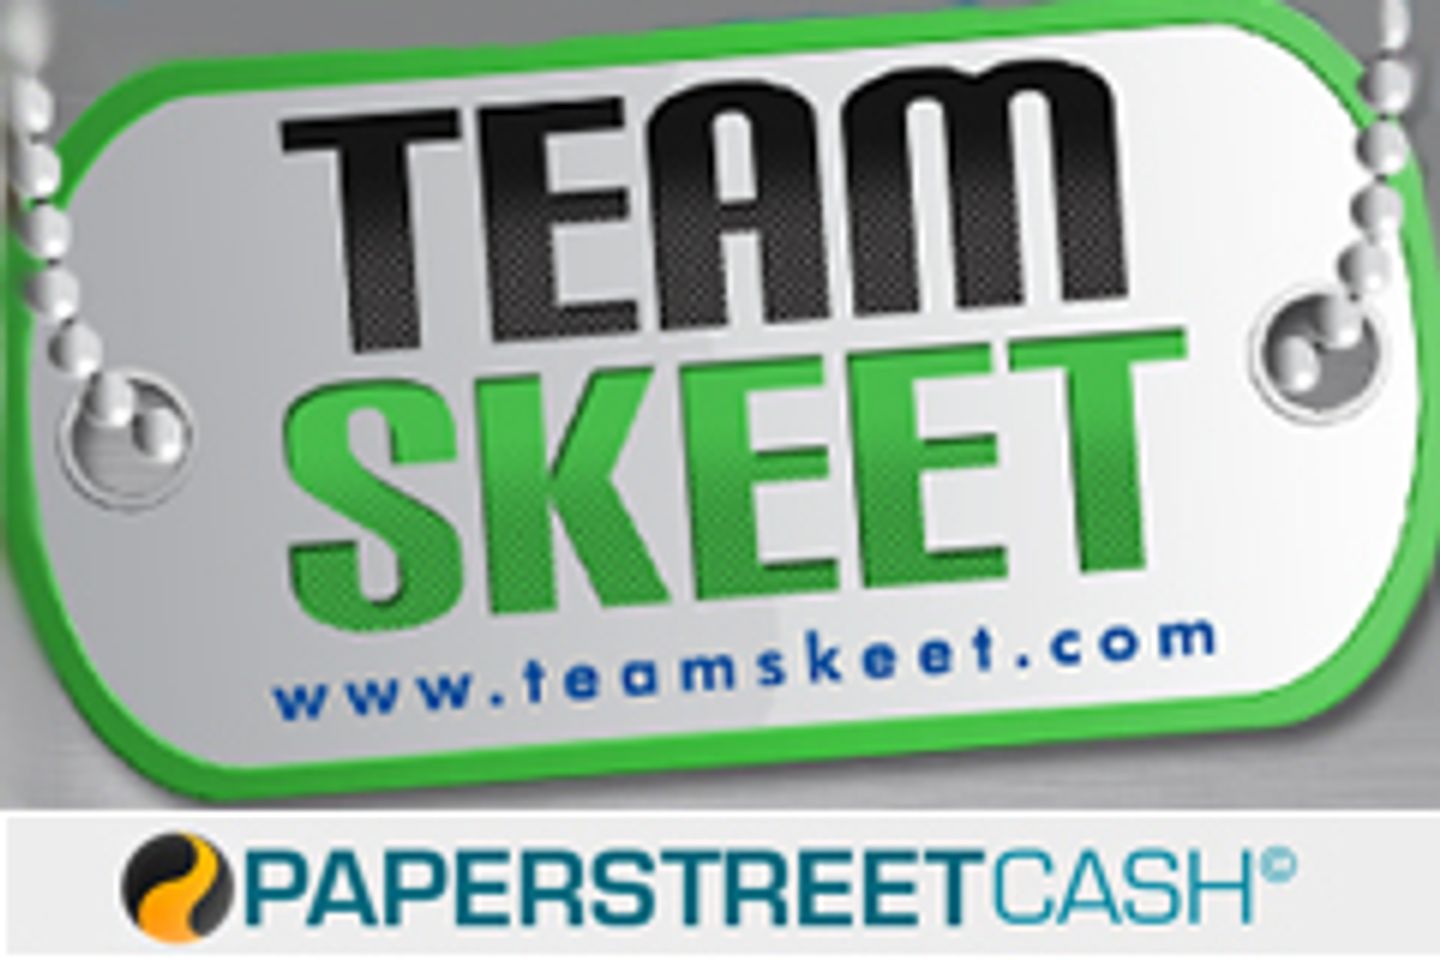 Go 'Back To School' With PaperStreetCash To Win an iPad Mini